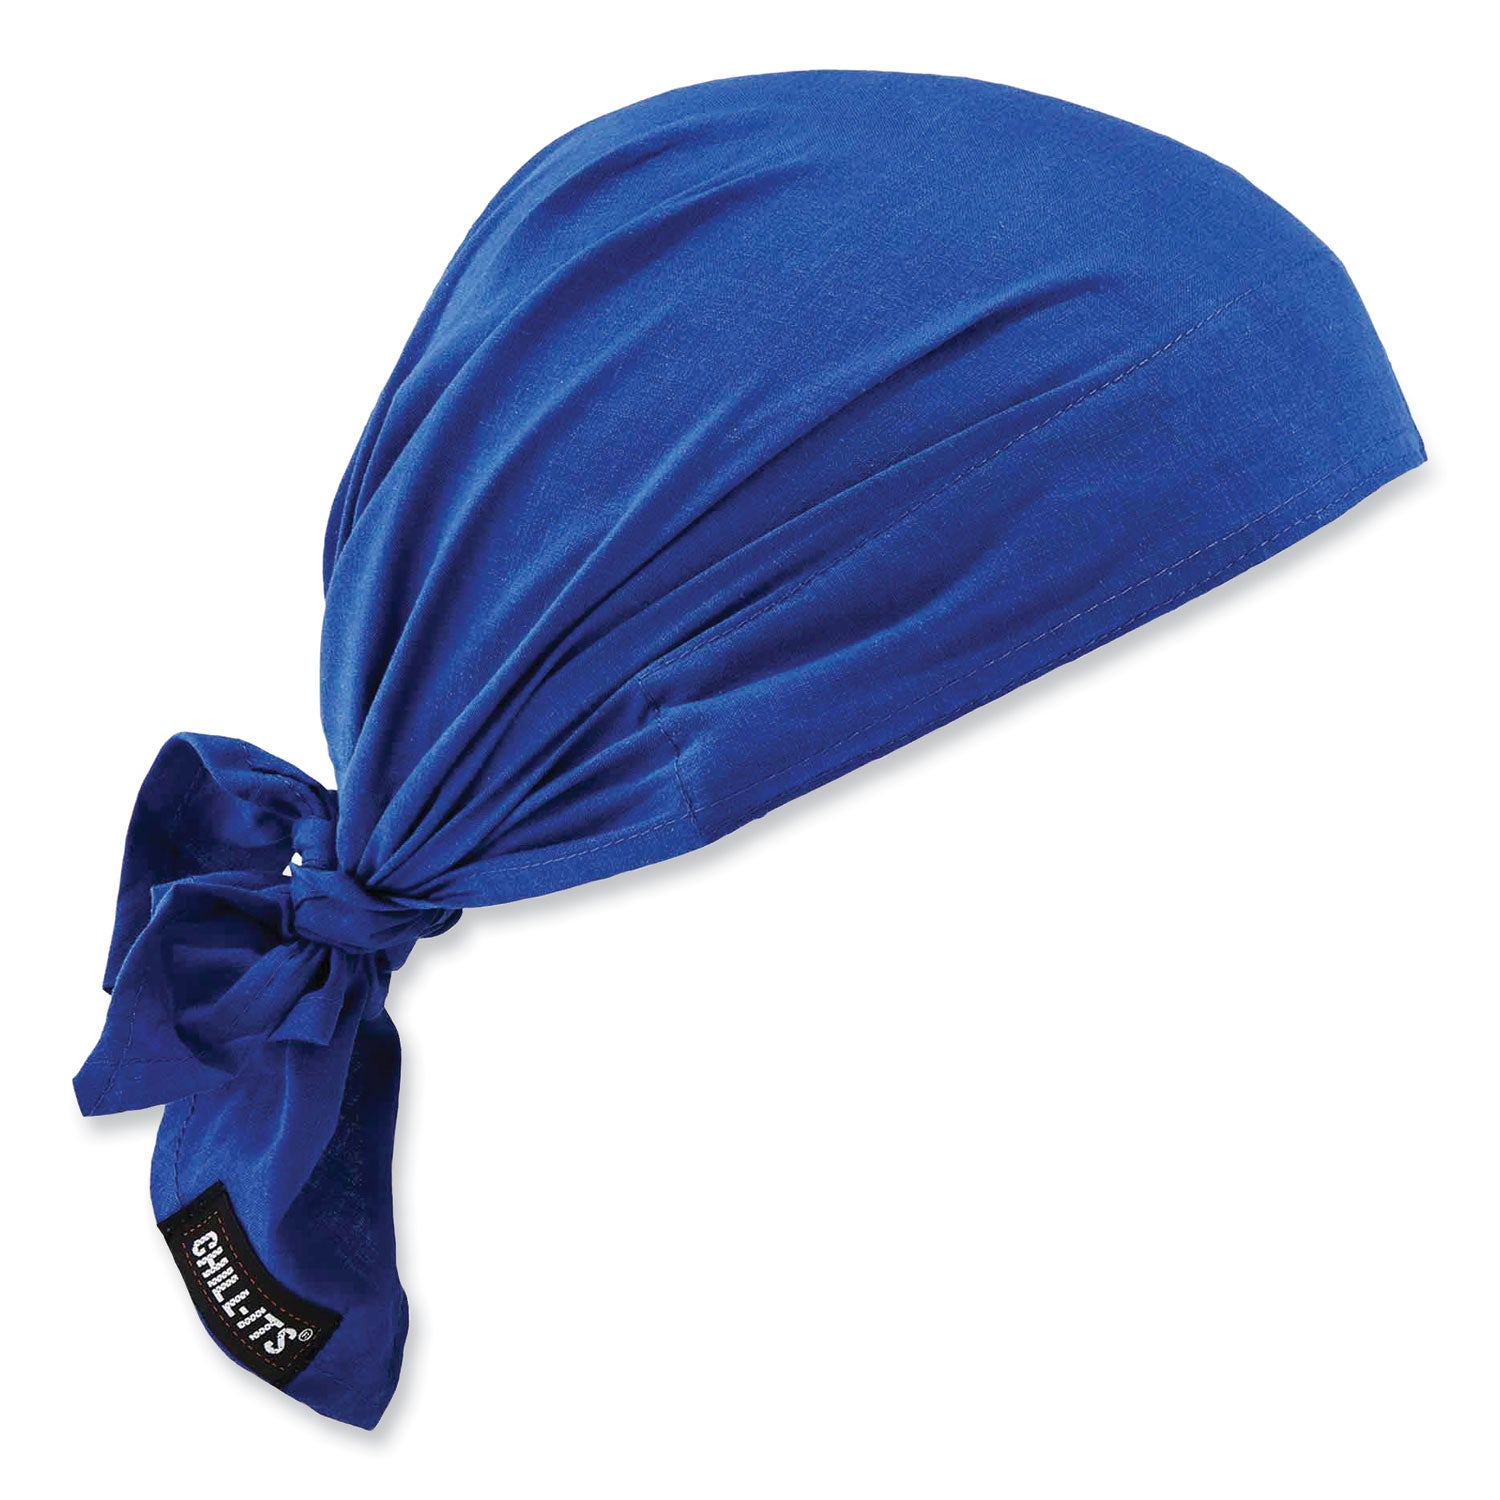 chill-its-6710ct-cooling-pva-tie-bandana-triangle-hat-one-size-fits-most-solid-blue-ships-in-1-3-business-days_ego12587 - 1